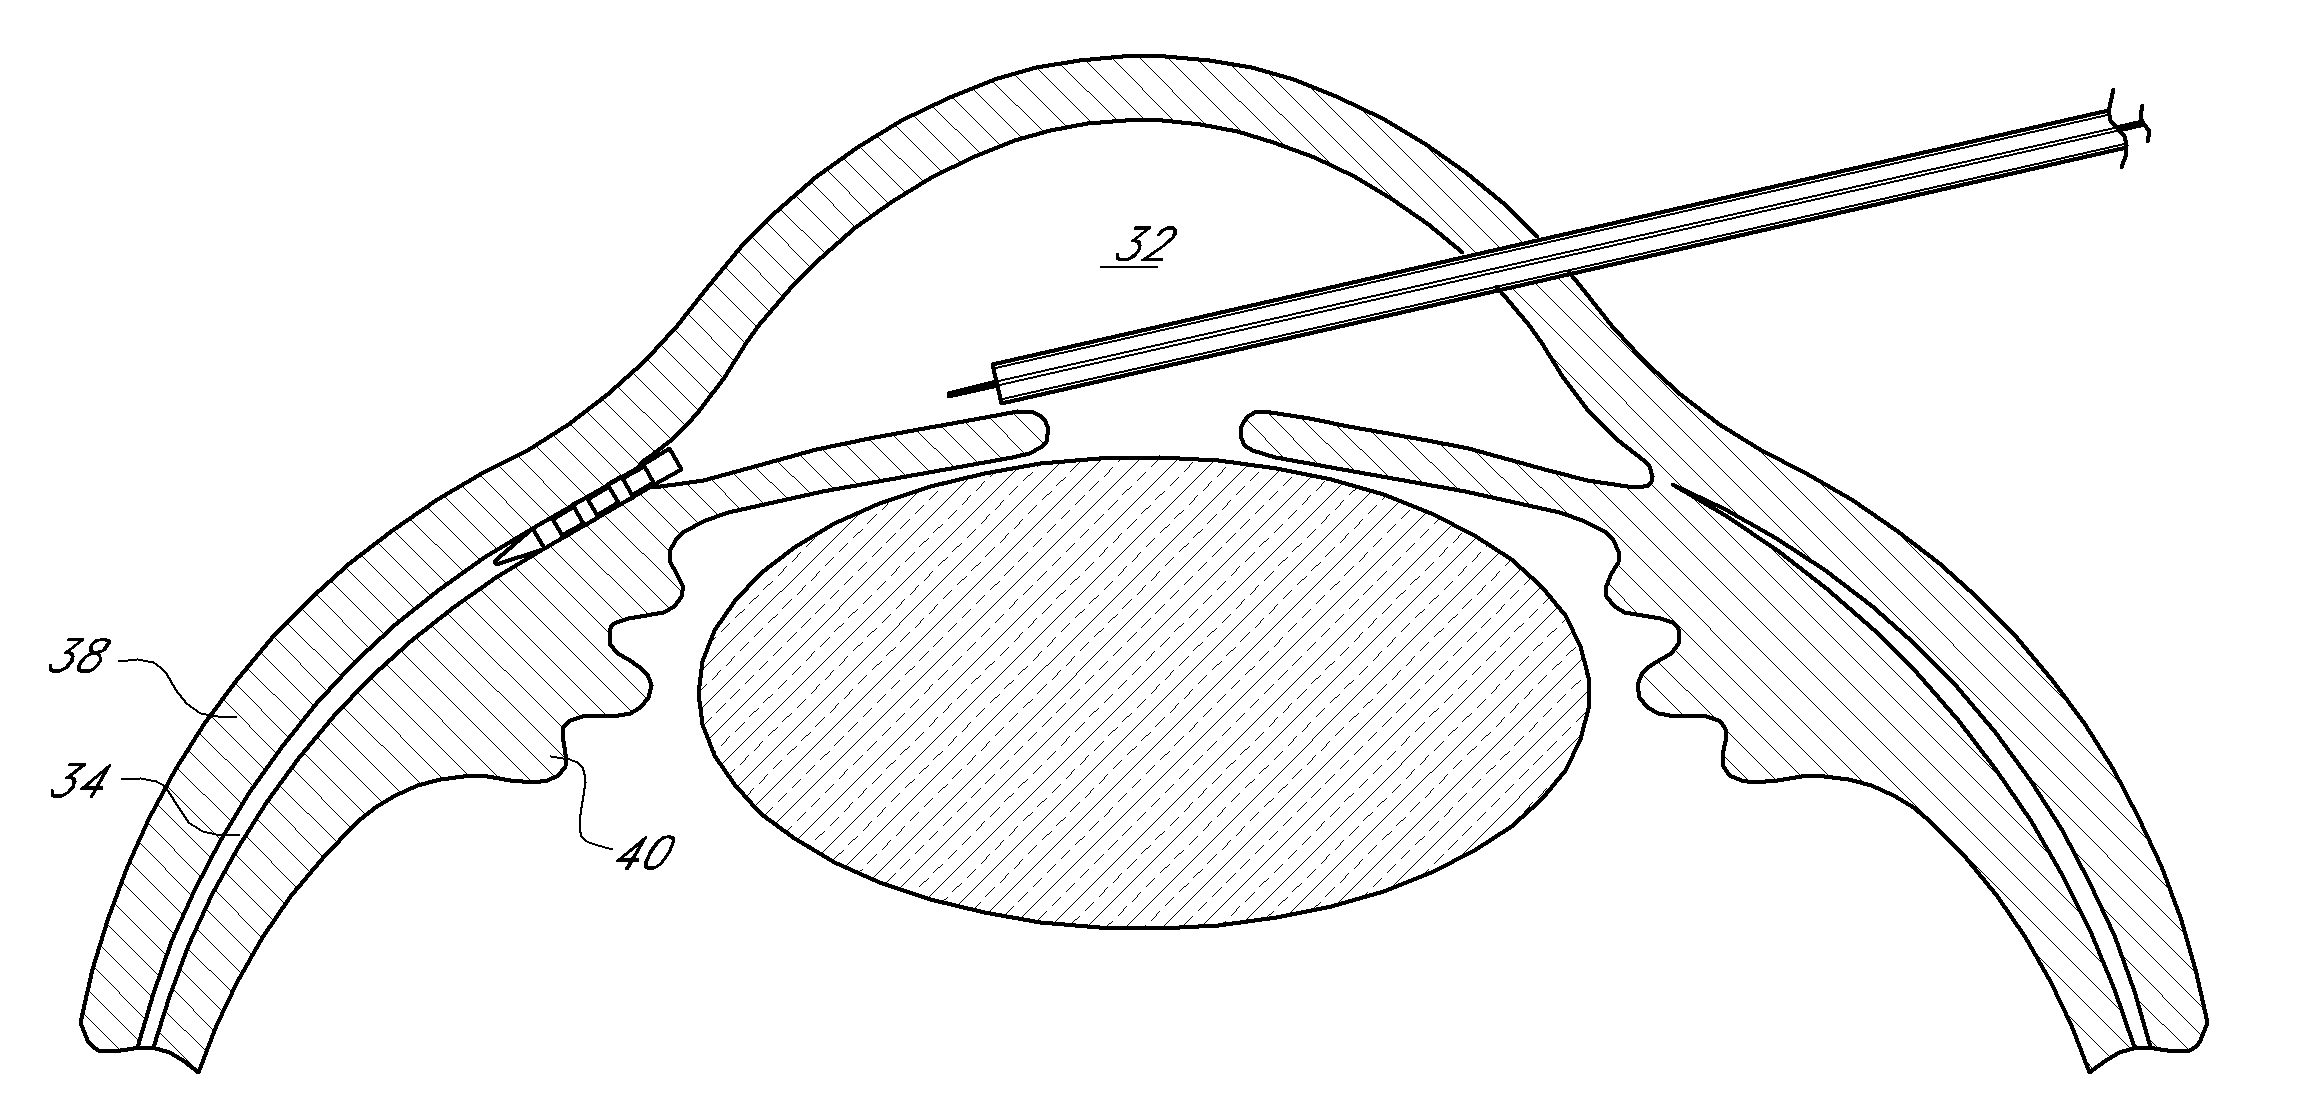 Uveoscleral shunt and methods for implanting same